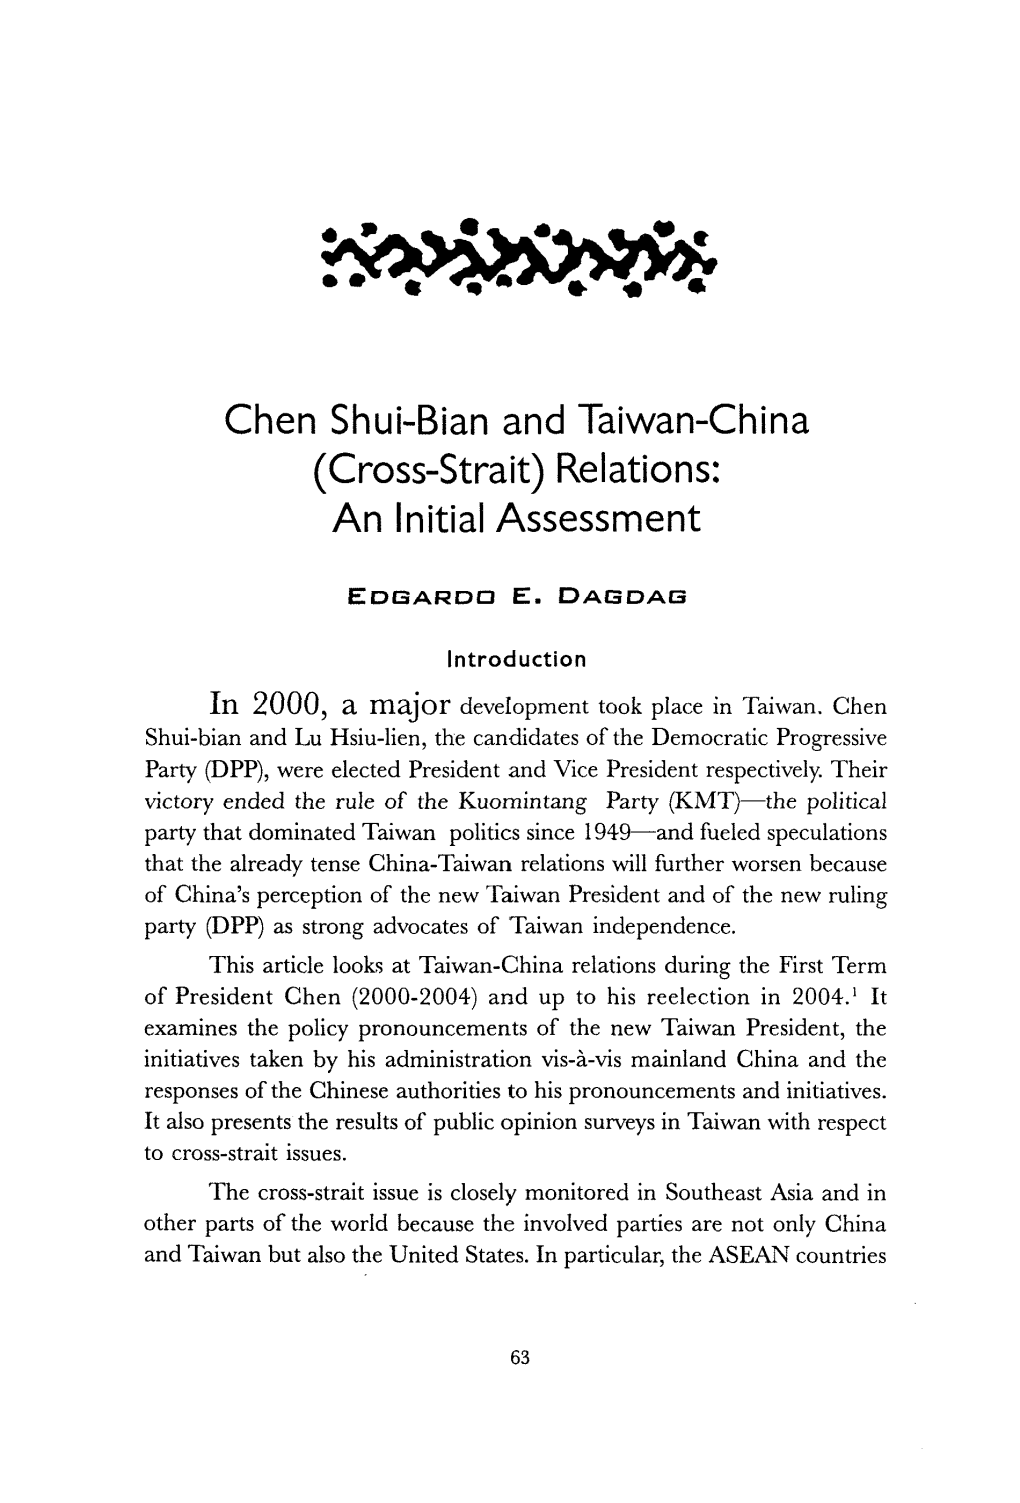 Chen Shui-Bian and Taiwan-China (Cross-Strait) Relations: an Initial Assessment